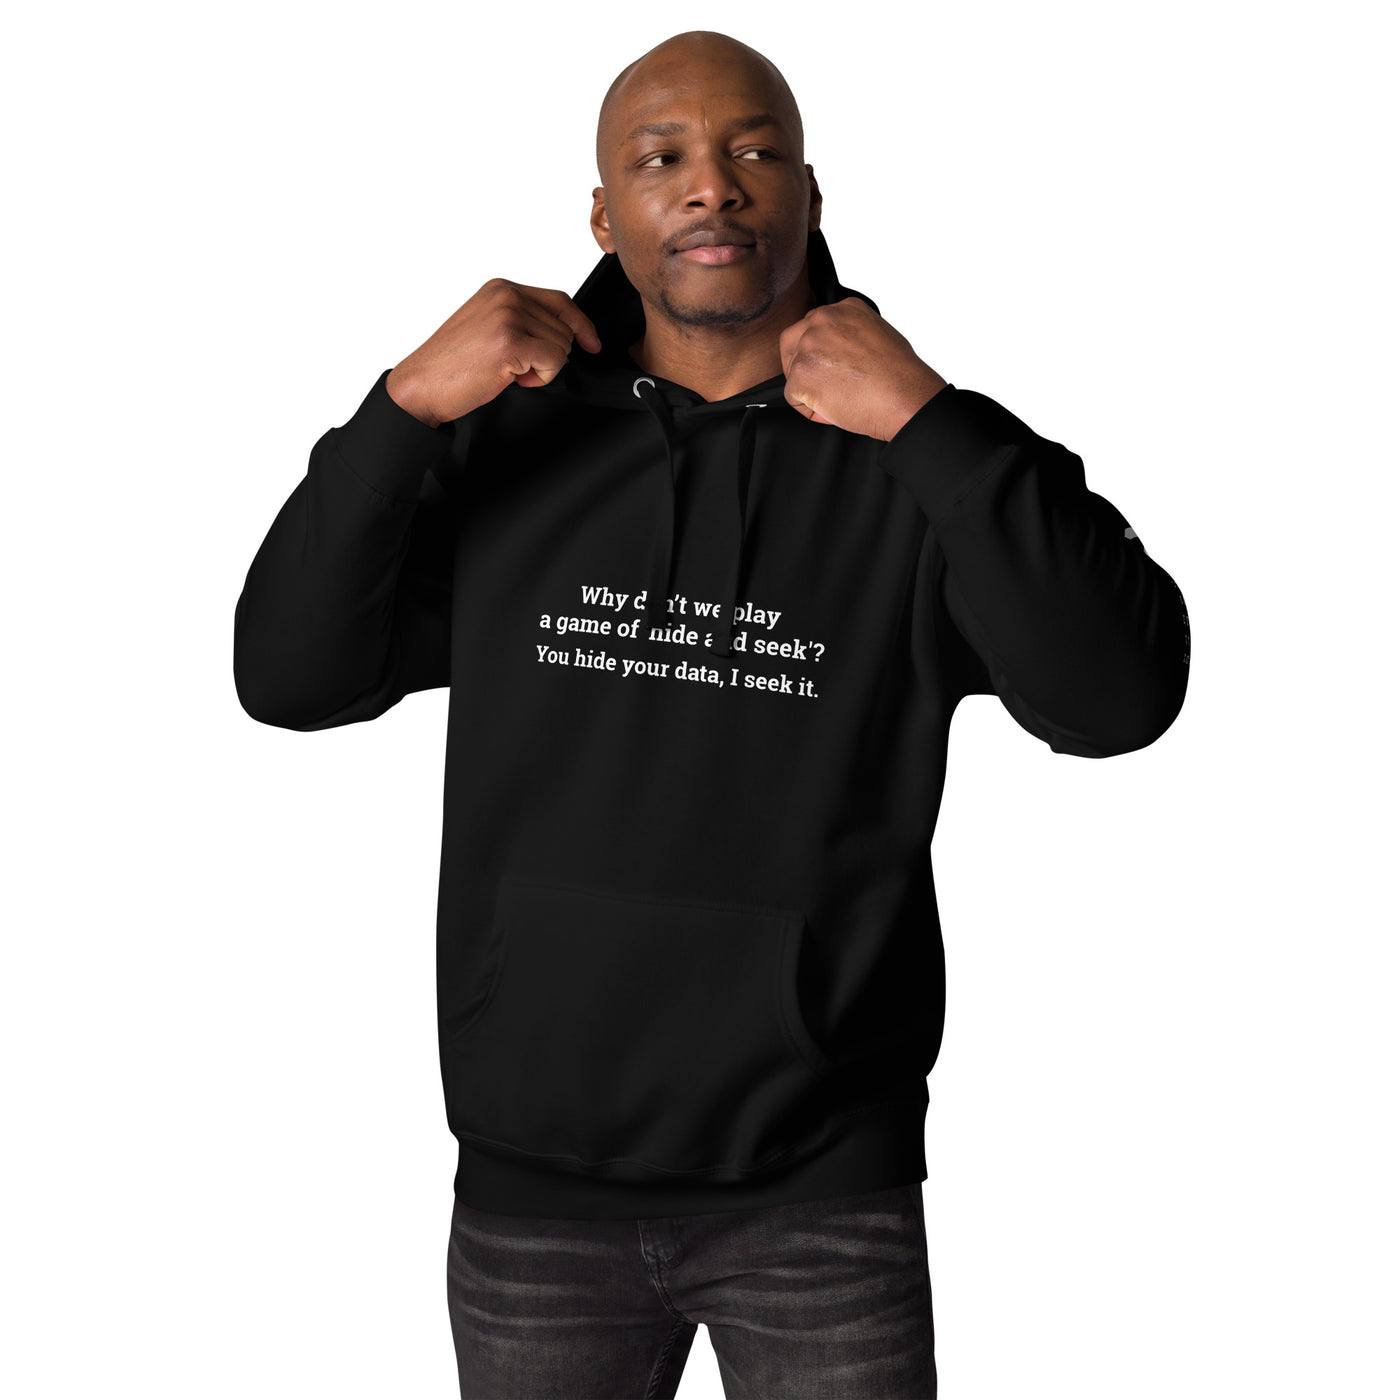 Why don't we Play a game of Hide and Seek V1 - Unisex Hoodie